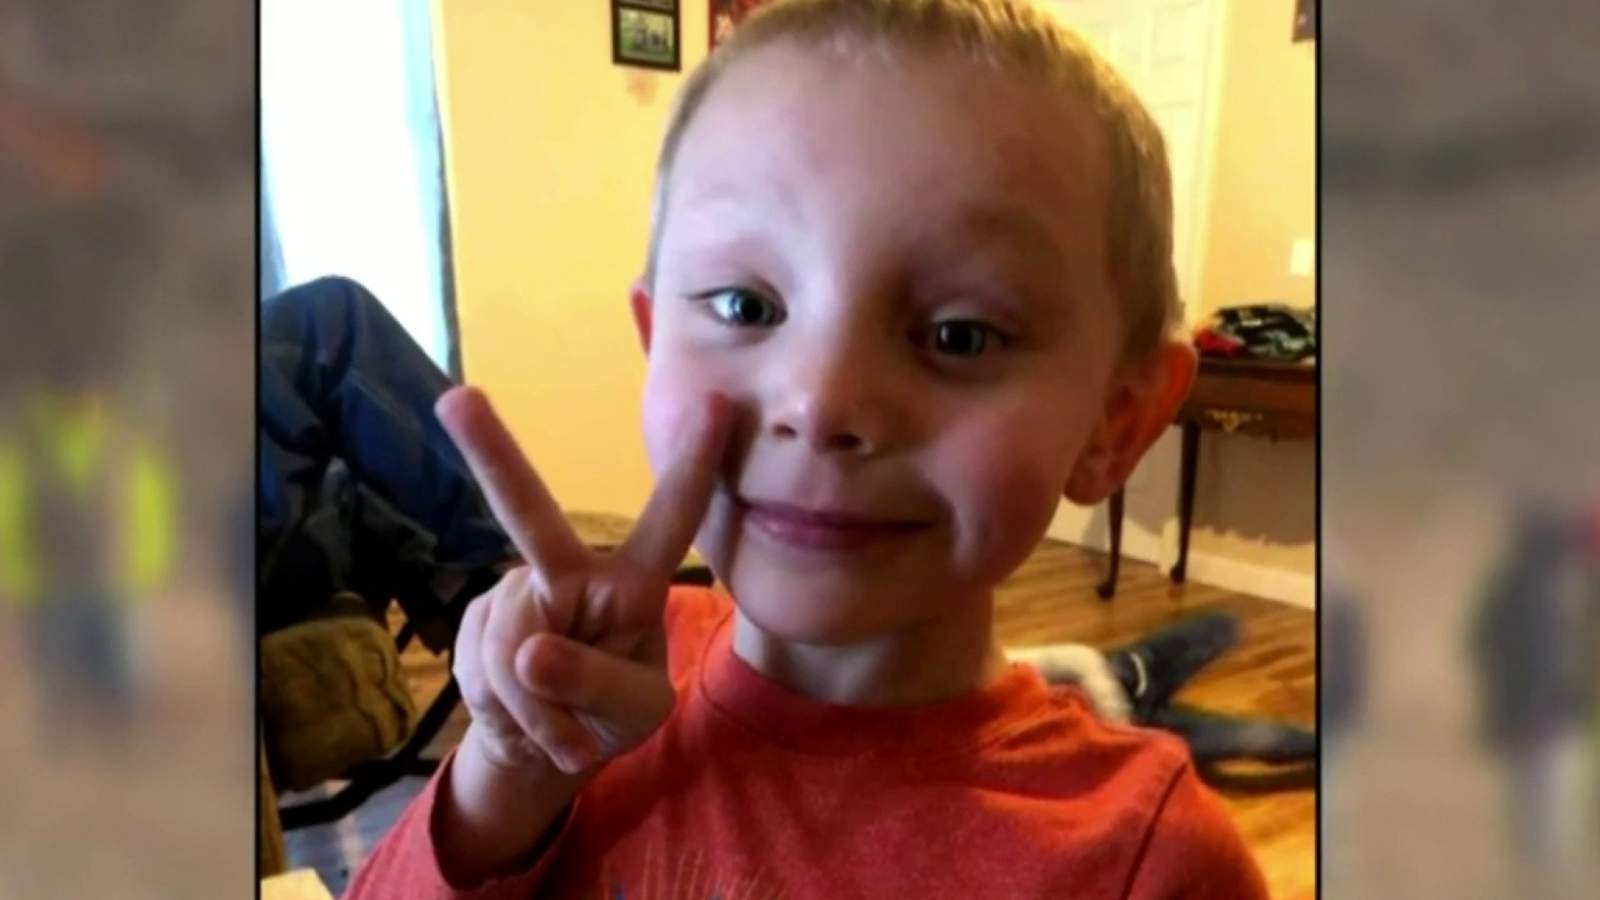 Body of 5-year-old Michigan boy found in pond after going missing on Christmas